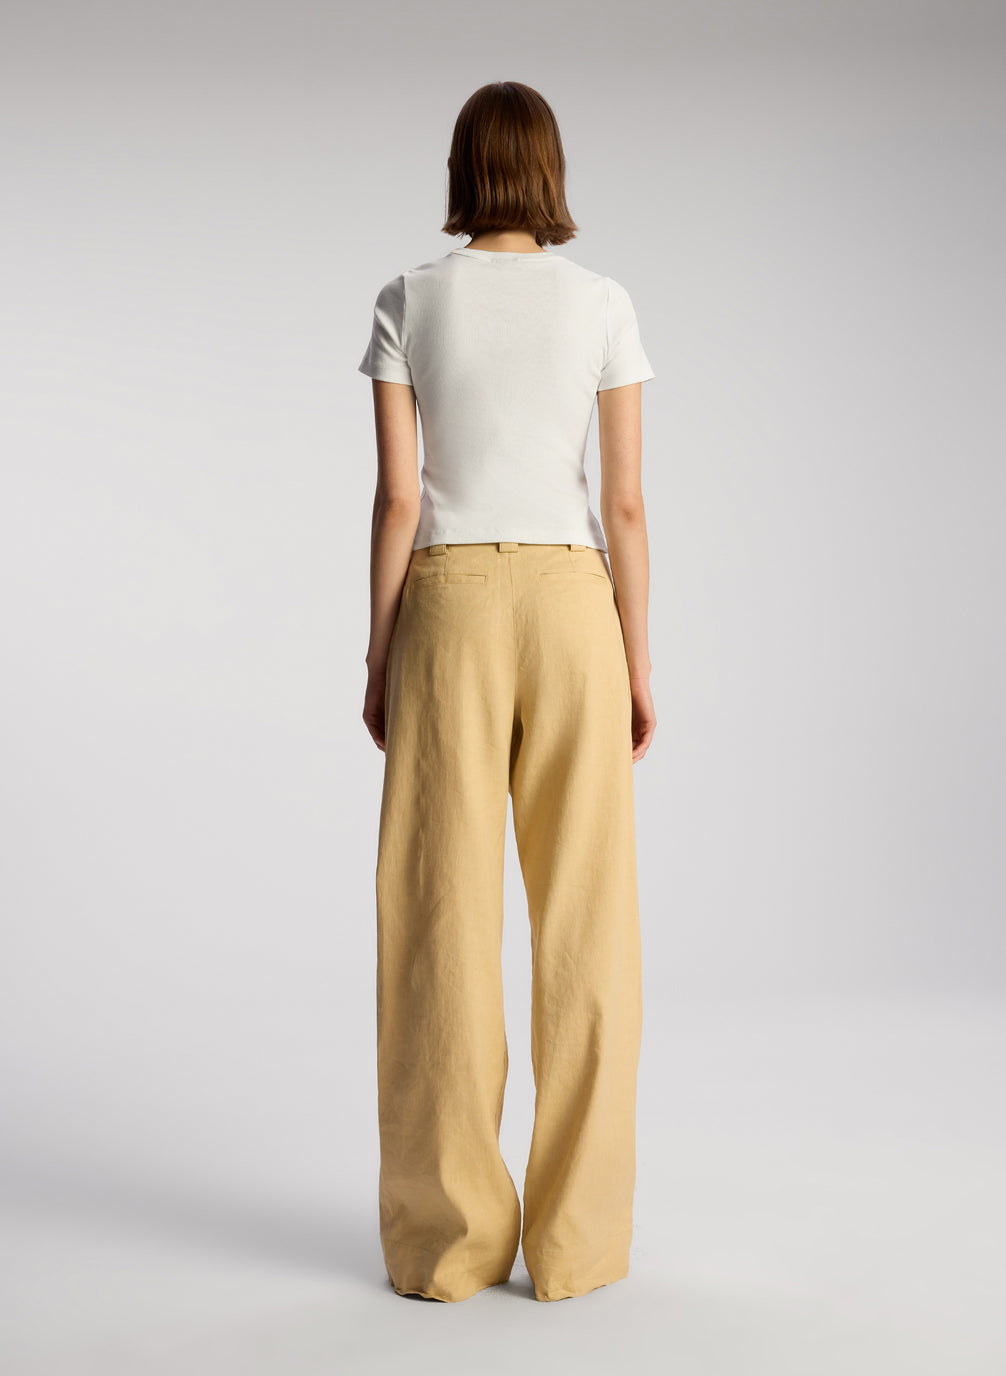 back view of woman wearing white tshirt and beige wide leg pants